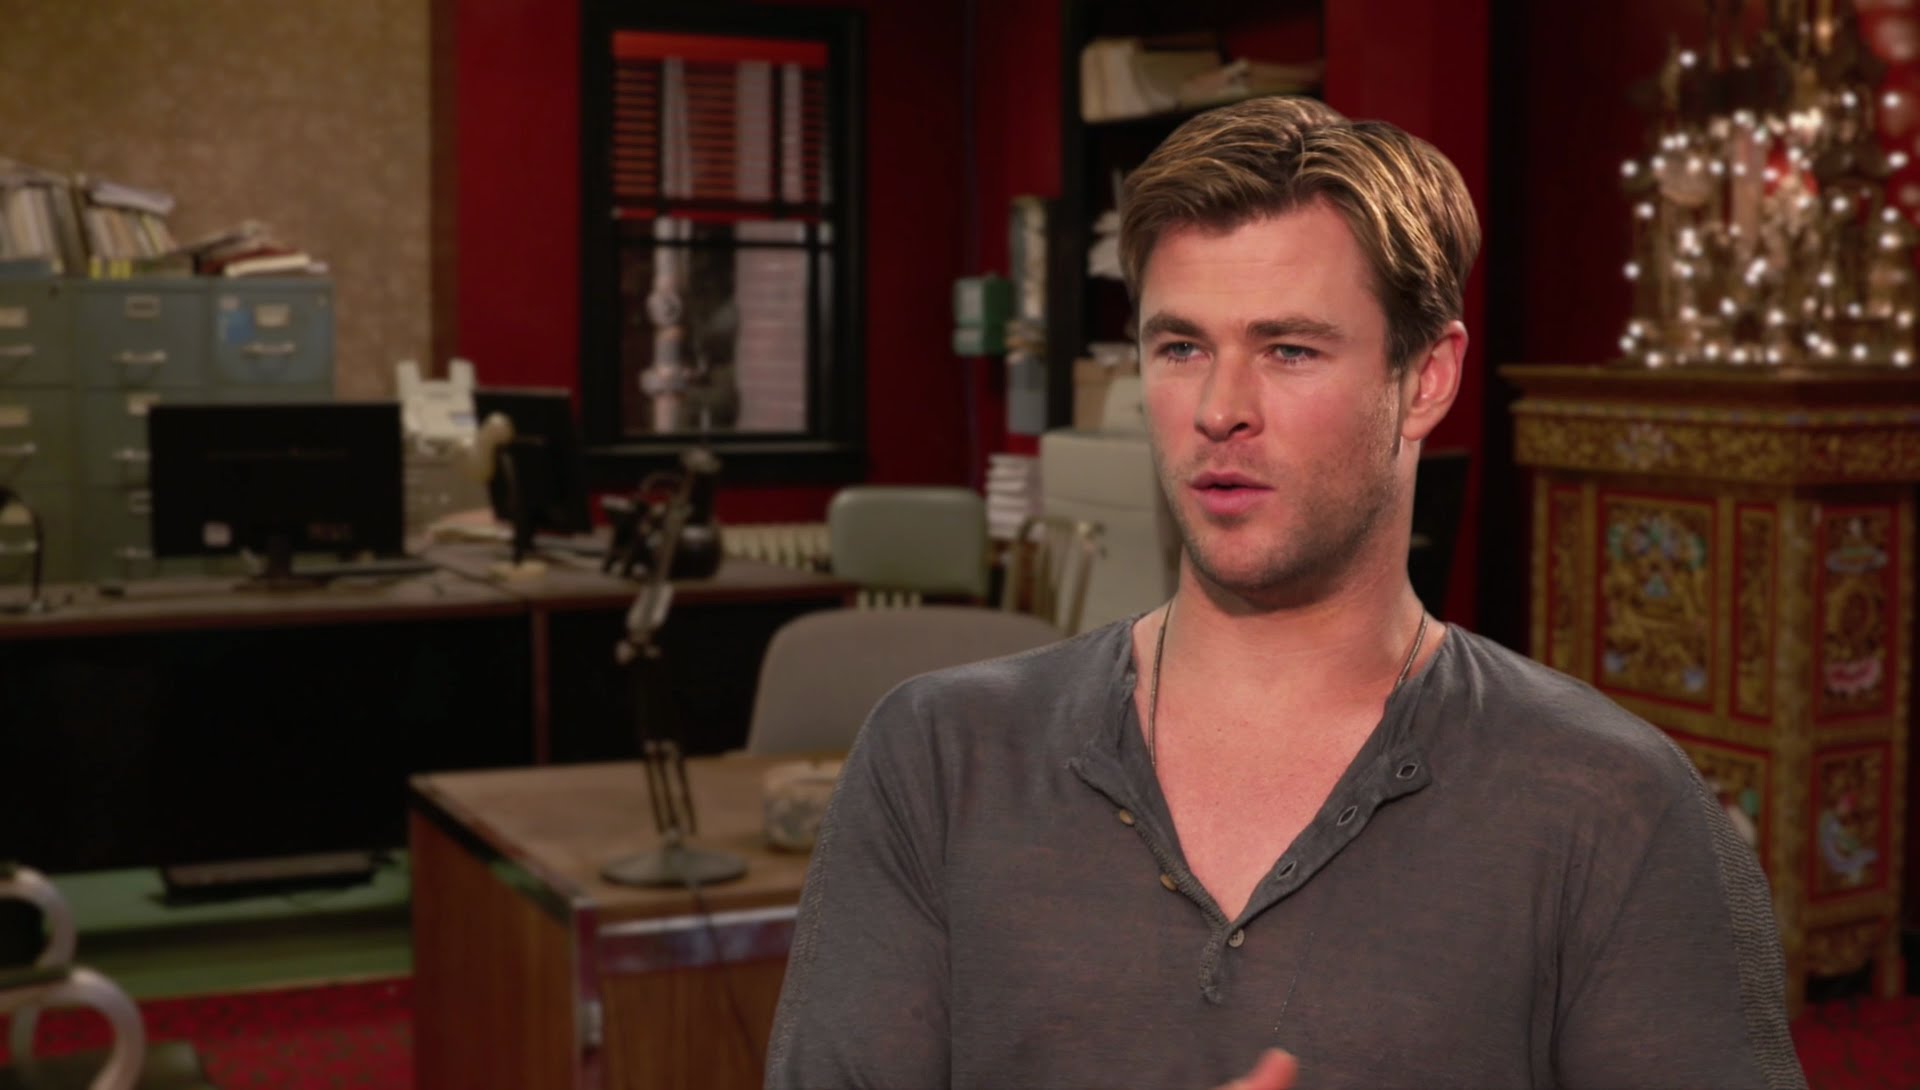 Chris Hemsworth compara Thor a Kevin, il receptionist di Ghostbusters [VIDEO]